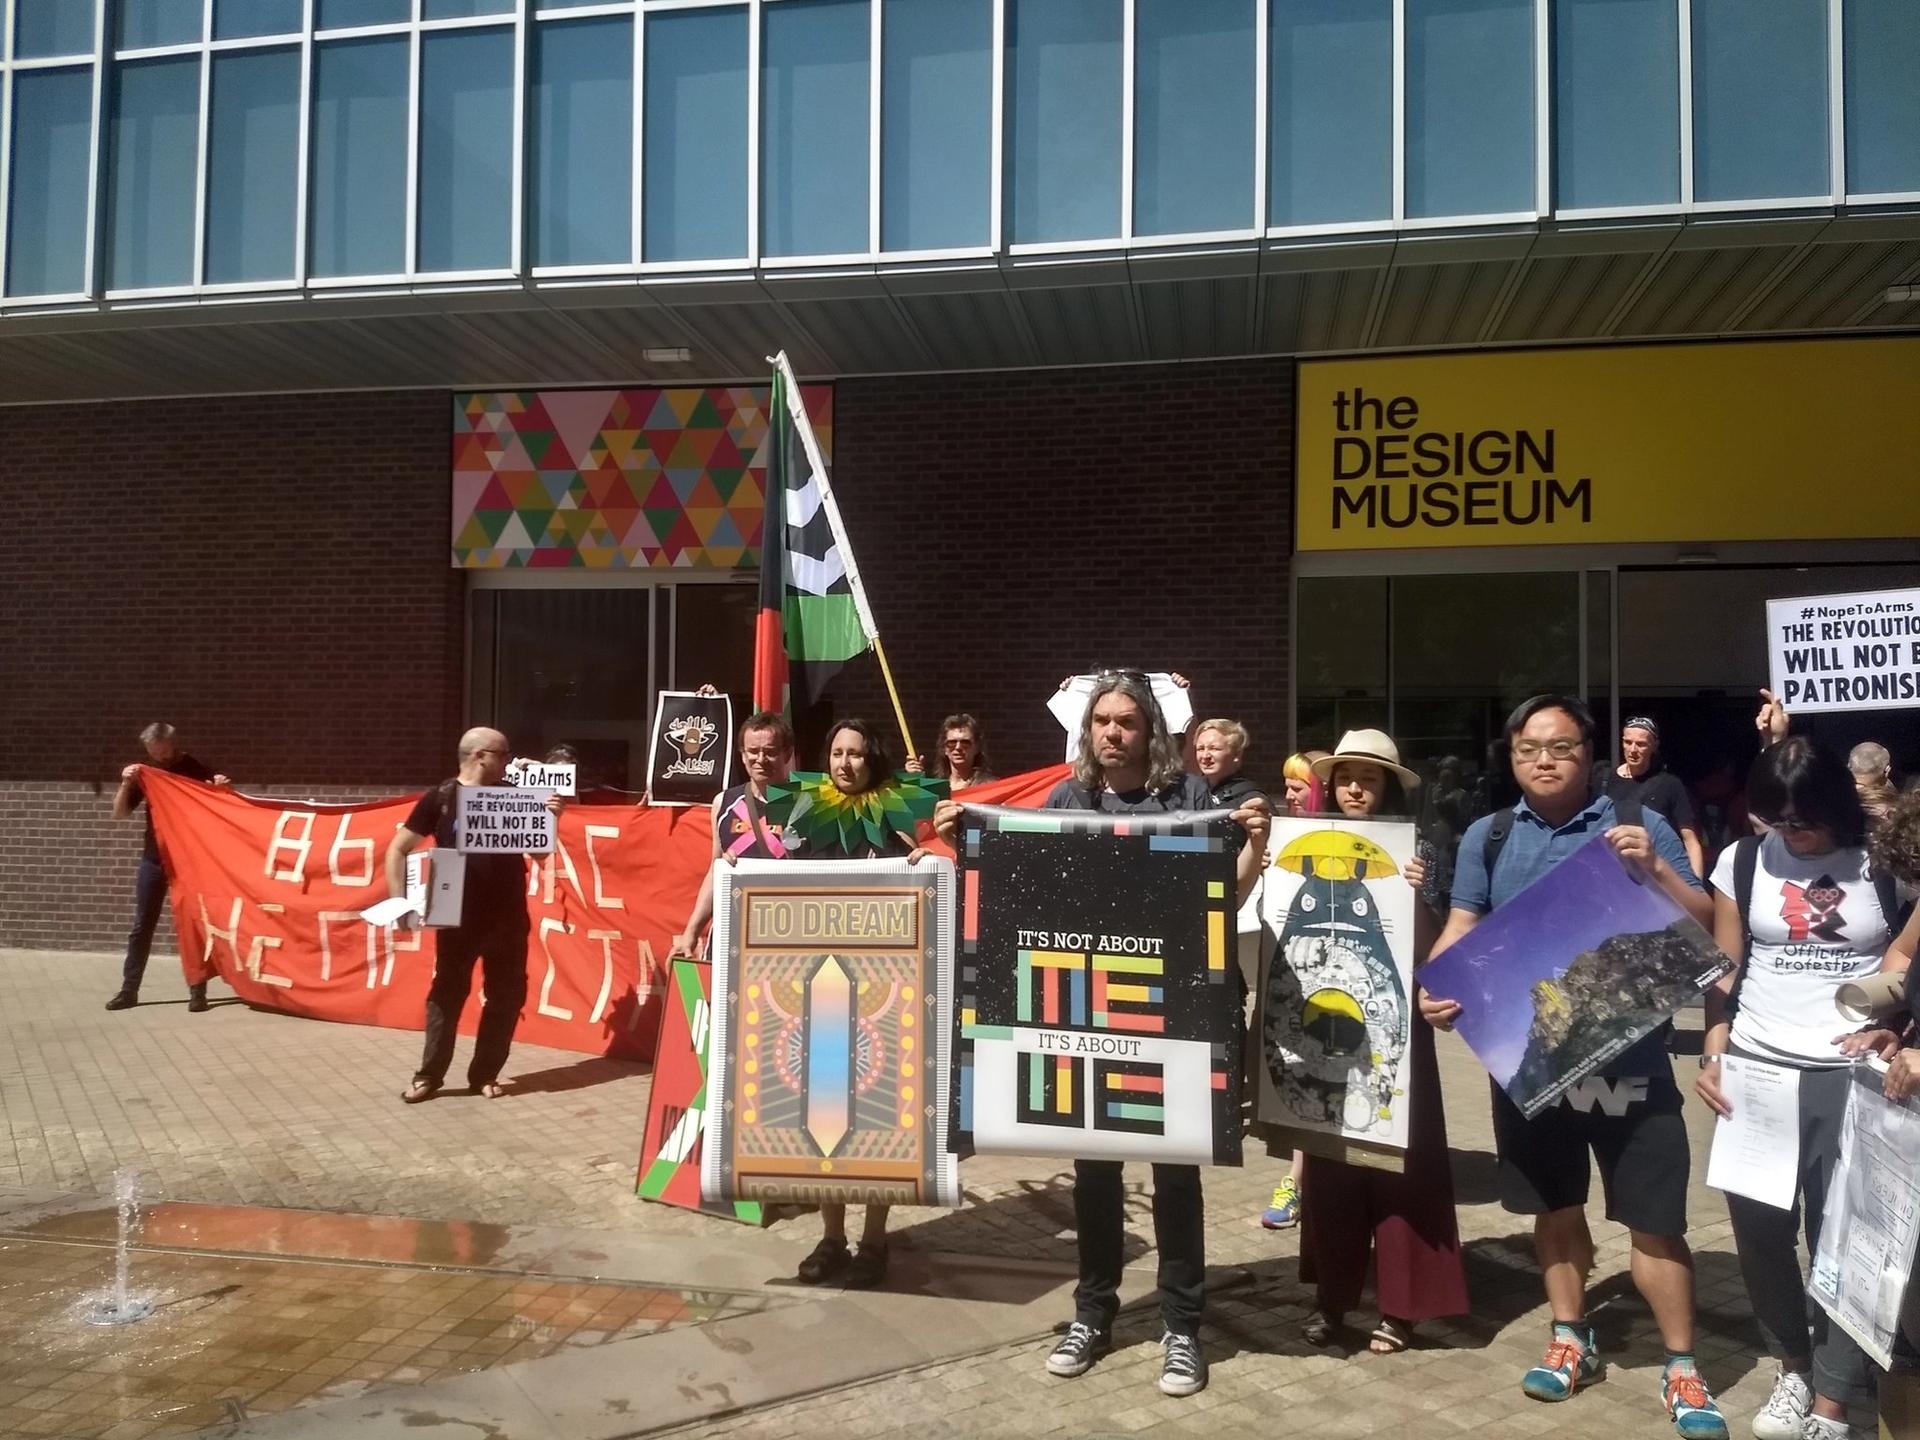 More than 40 artists have today removed their artwork from the Design Museum's Hope to Nope exhibition in protest Campaign Against Arms Trade via Twitter